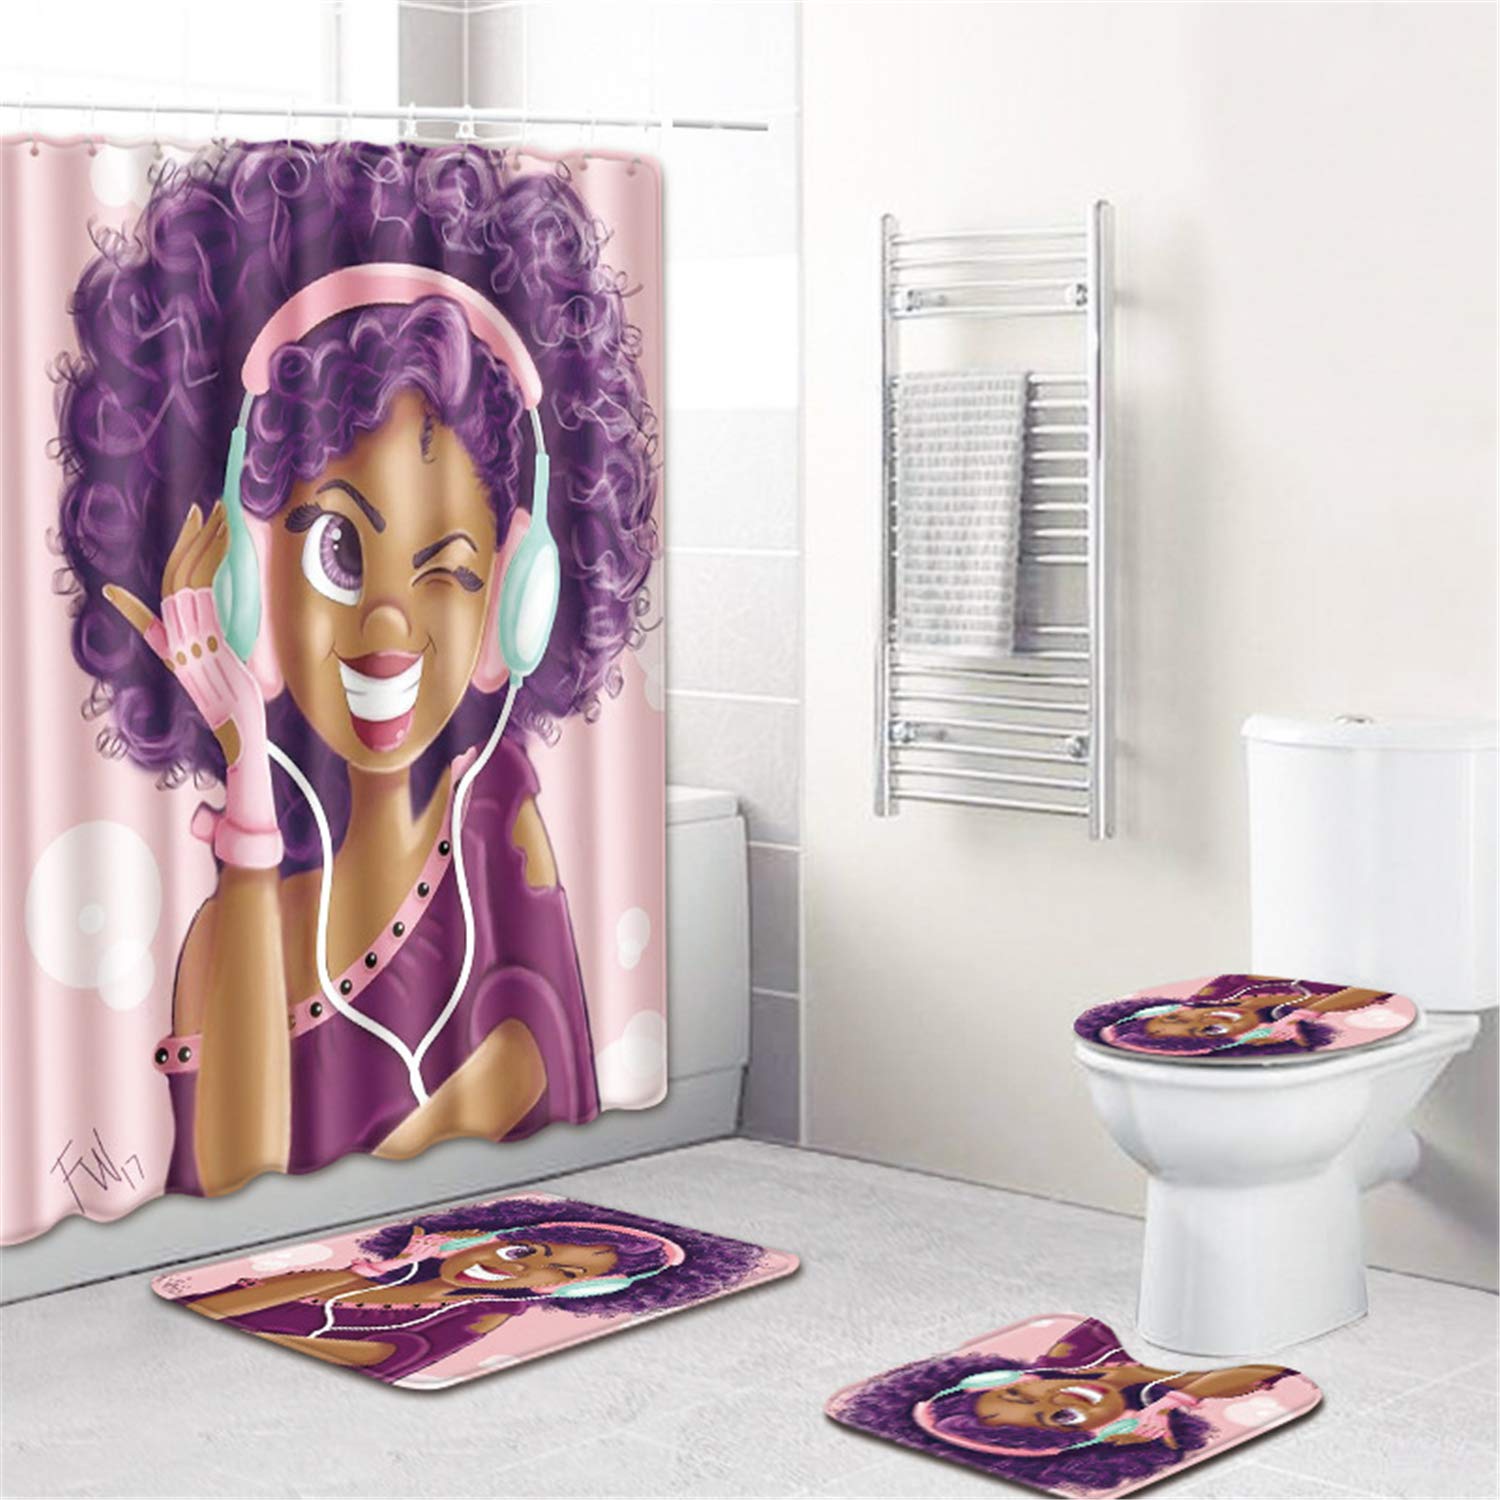 Book Cover Custcolor 4Pieces Decorative Bathroom Shower Curtain and Mat Set, Cute African American Girls with Headphone Bath Curtains with Hooks Durable Anti-Slip Bath Mat Toilet Cover Decor 71inch×71inch